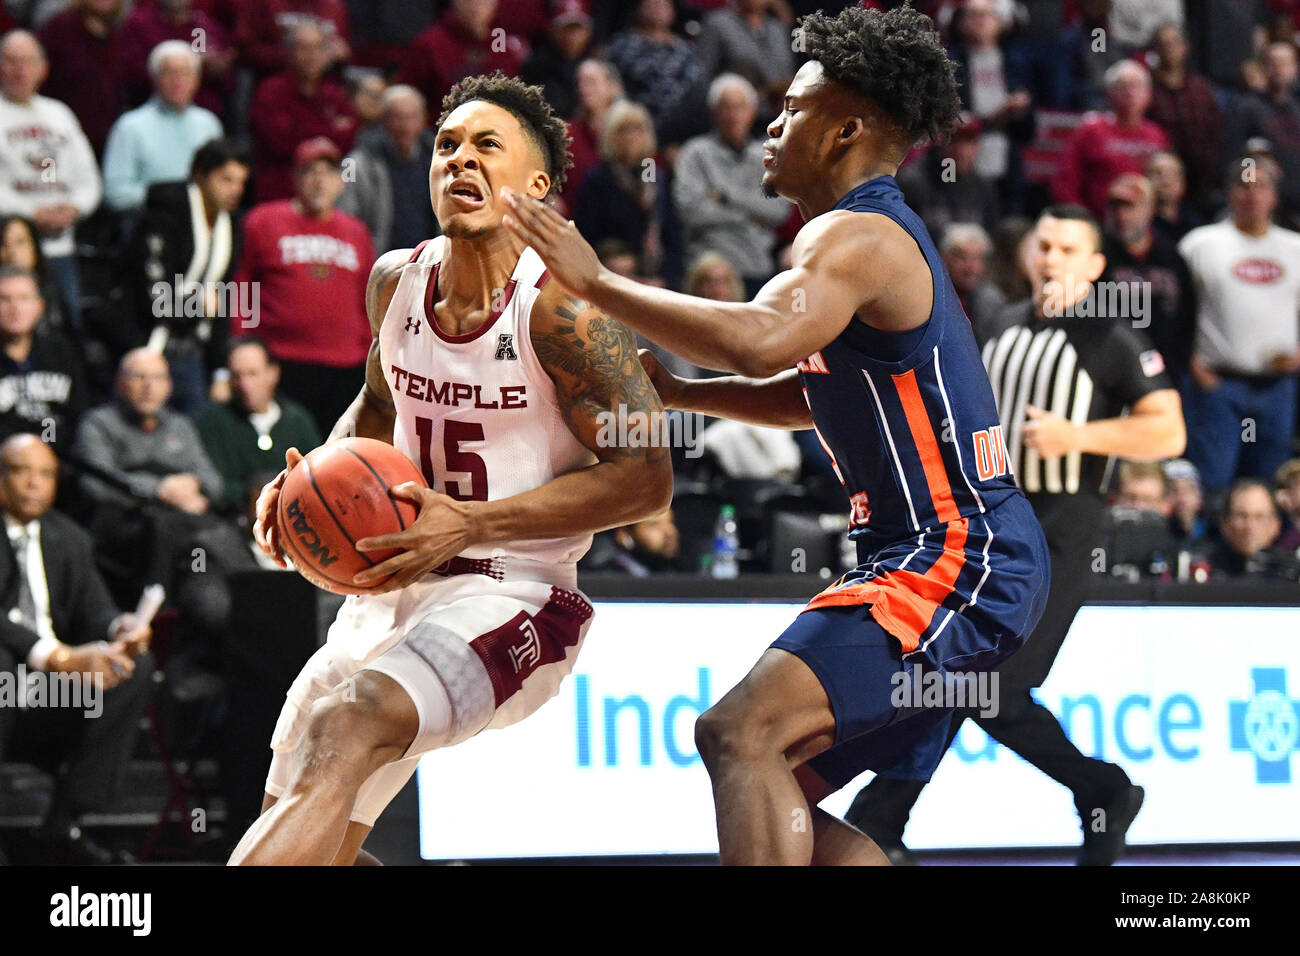 Philadelphia, Pennsylvania, USA. 9th Nov, 2019. Temple Owls guard NATE PIERRE-LOUIS (15) grimaces as he drives by Morgan State Bears guard SHERWYN DEVONISH-PRINCE JR (5) during the basketball game played at the Liacouras Center in Philadelphia. Temple beat Morgan State 75-57. Credit: Ken Inness/ZUMA Wire/Alamy Live News Stock Photo